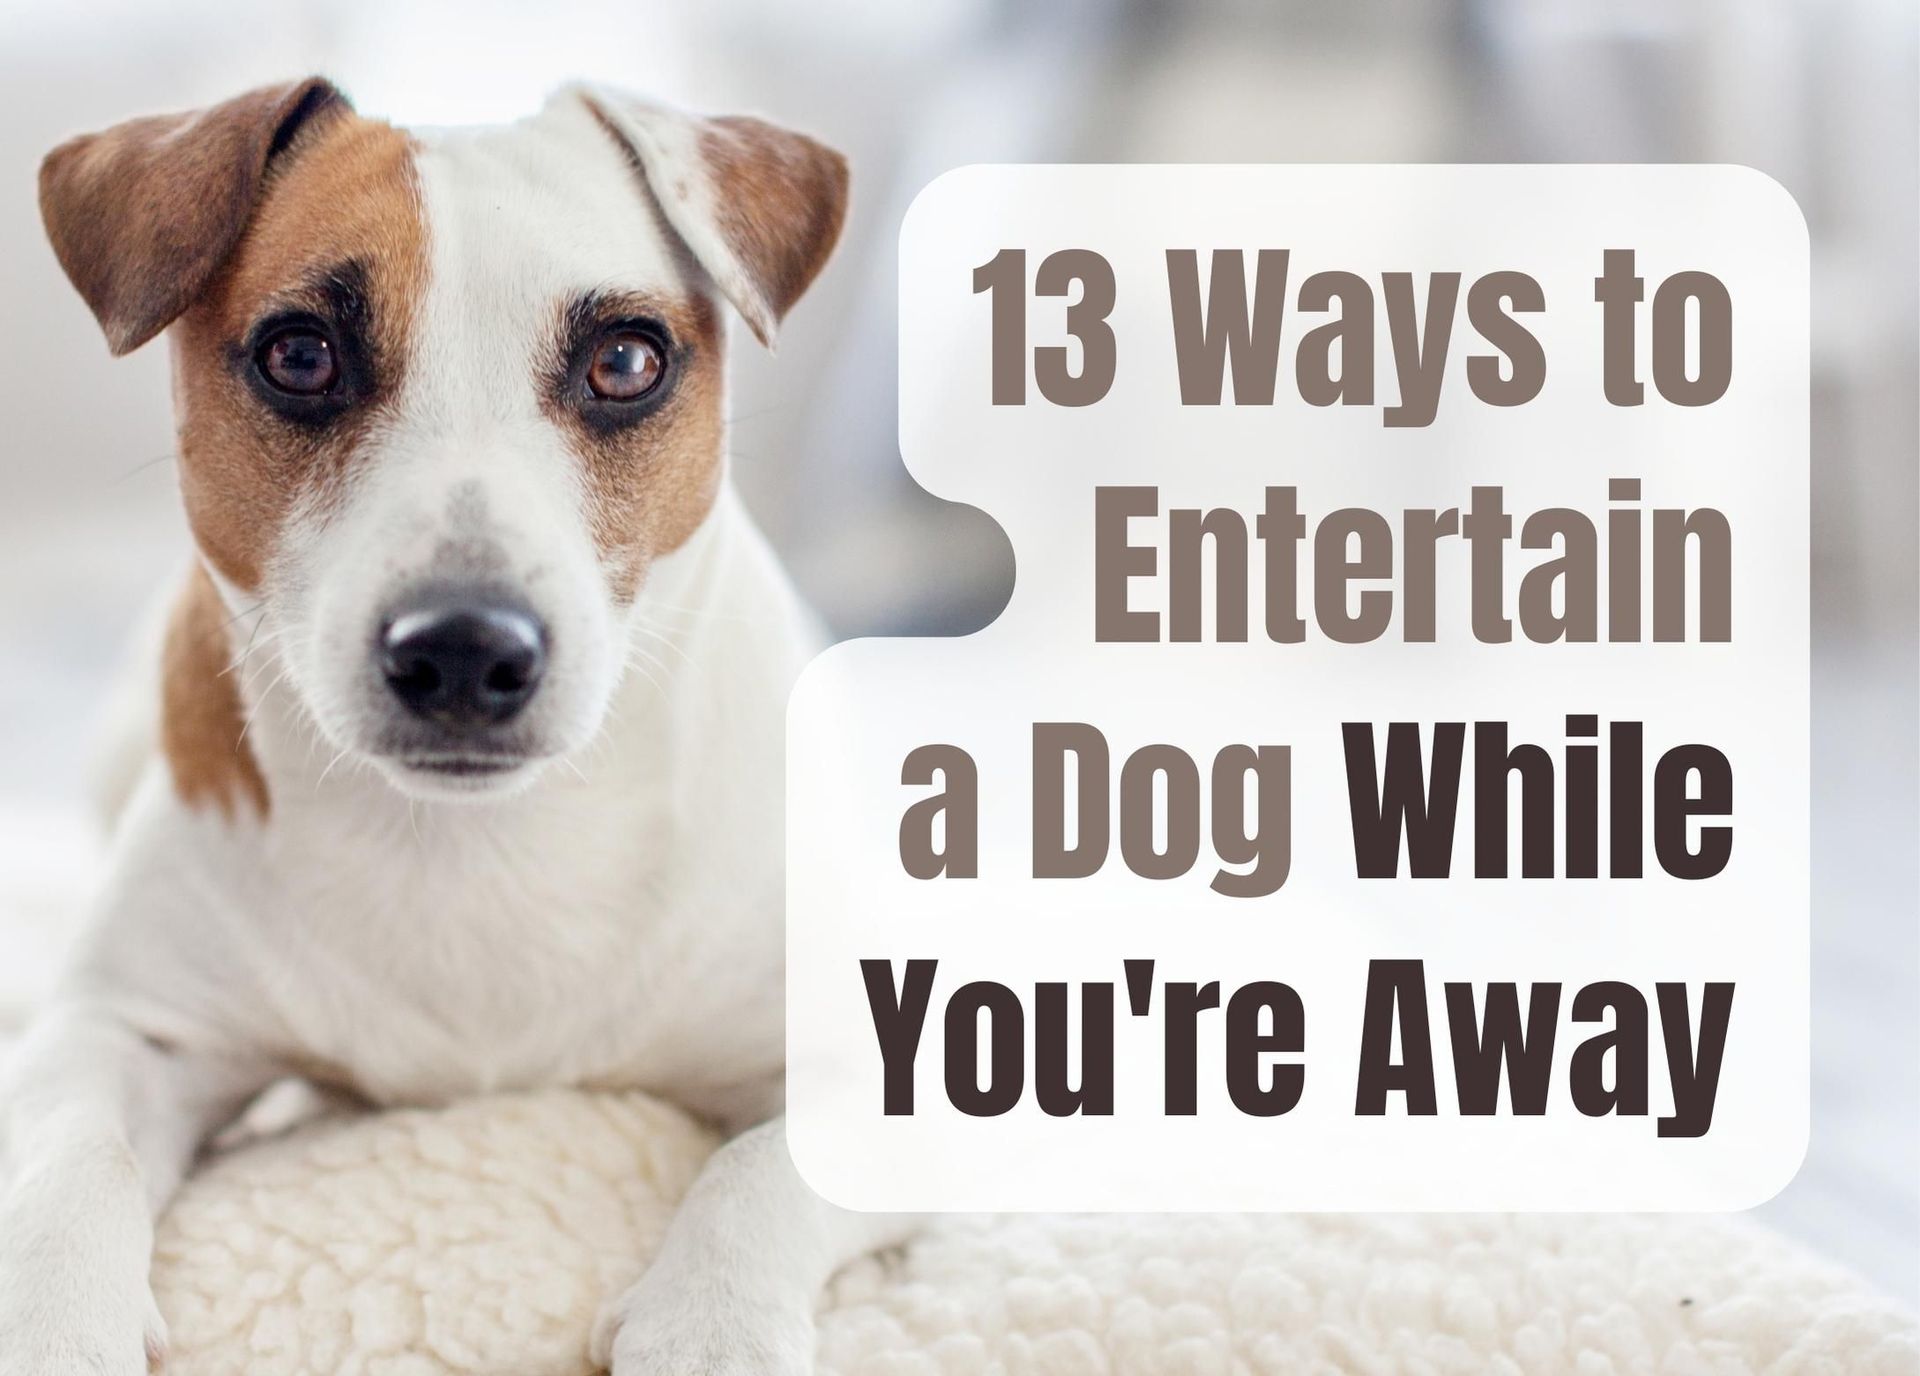 How to keep your dog entertained while you're away